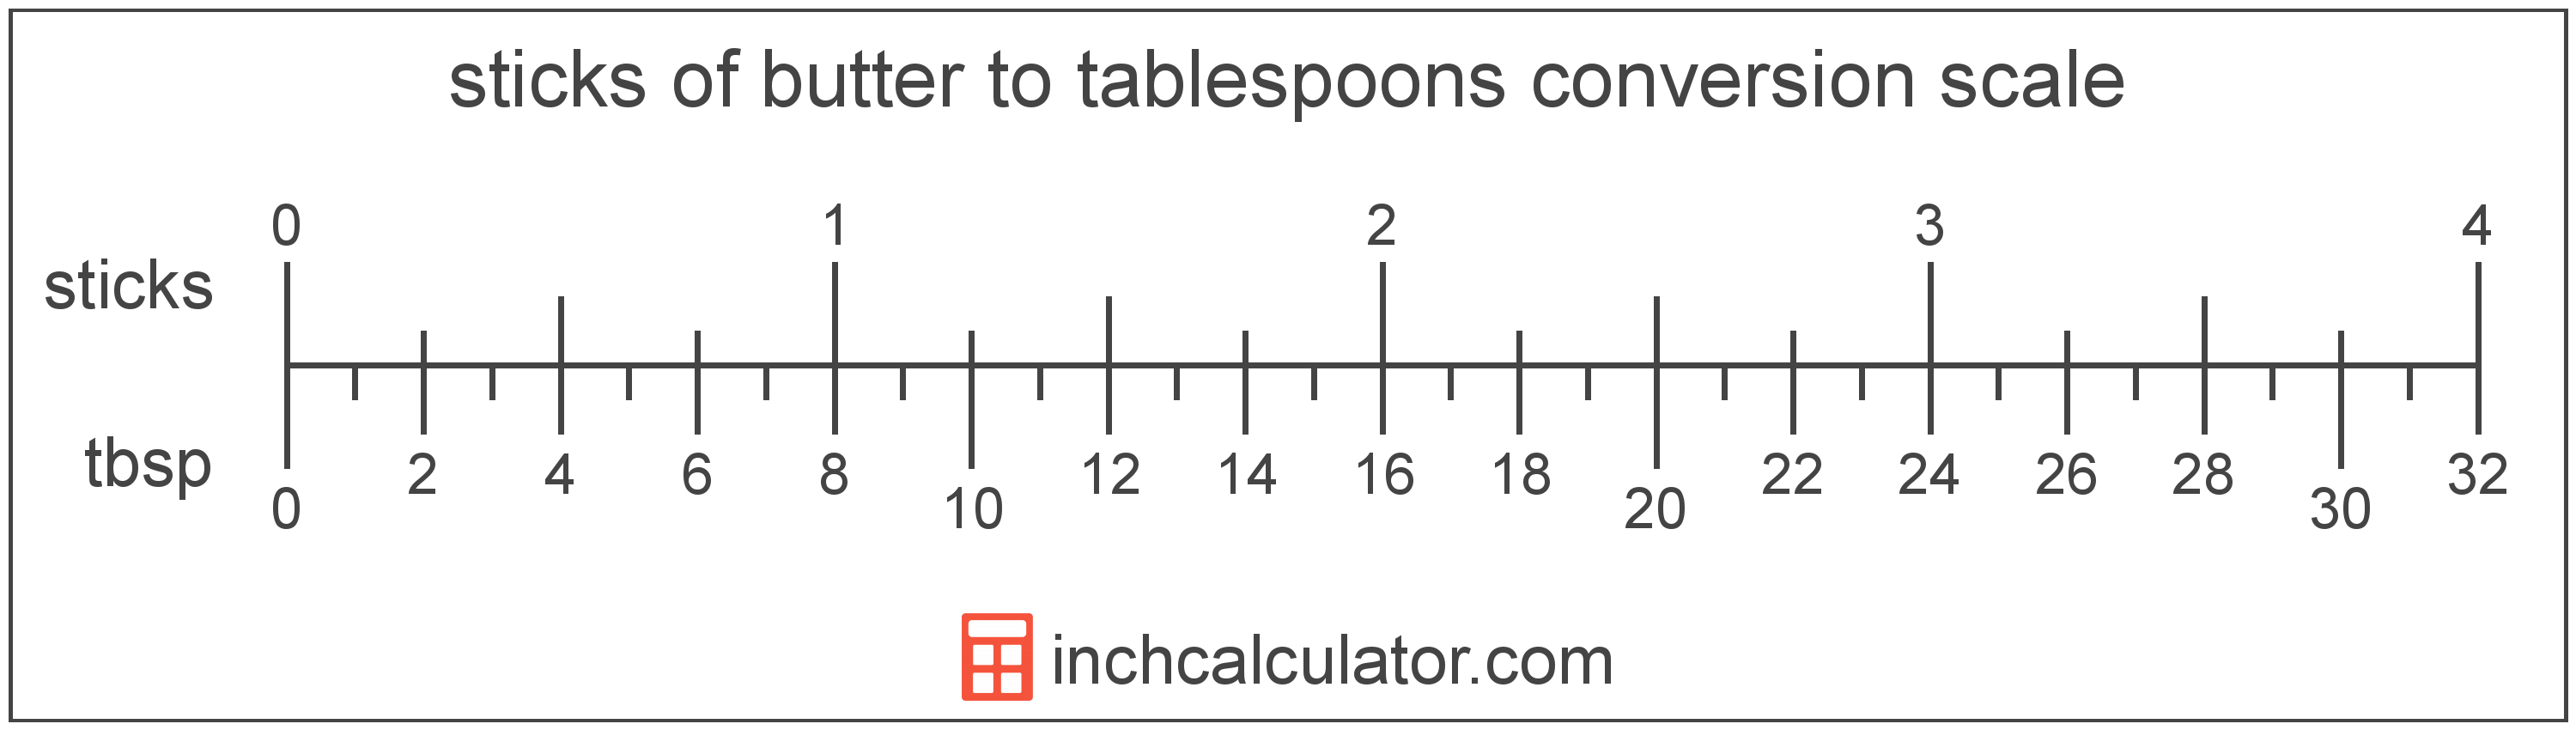 conversion scale showing tablespoons and equivalent sticks of butter butter values